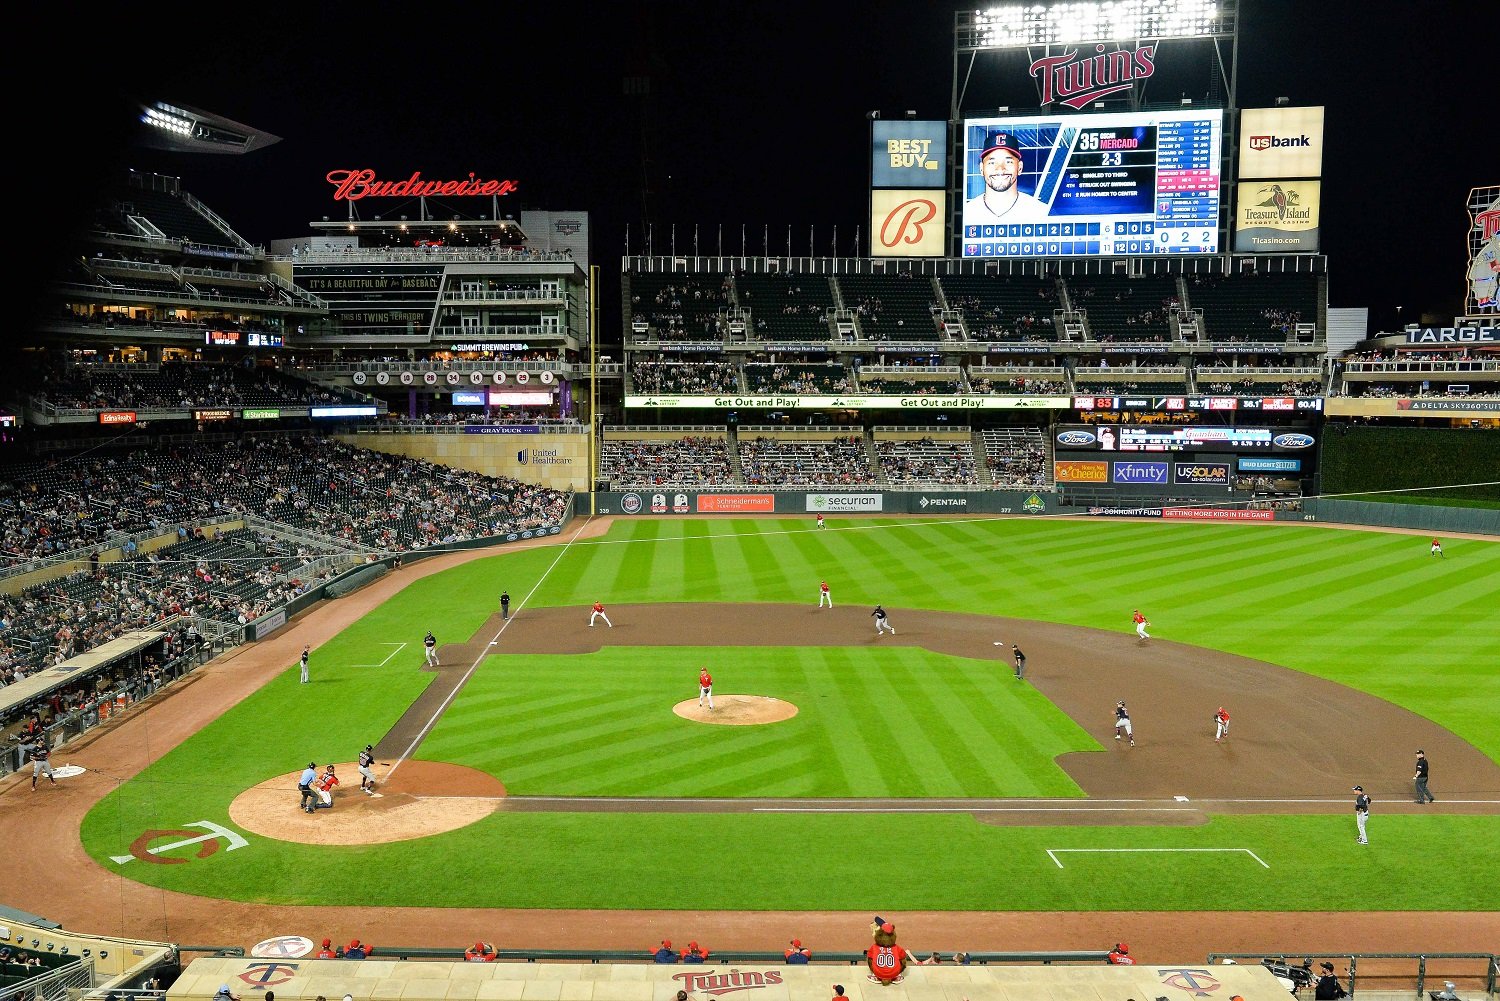 Diamond Sports Bankruptcy Coming to a Head What Does That Mean for Twins TV Deal? - Twins